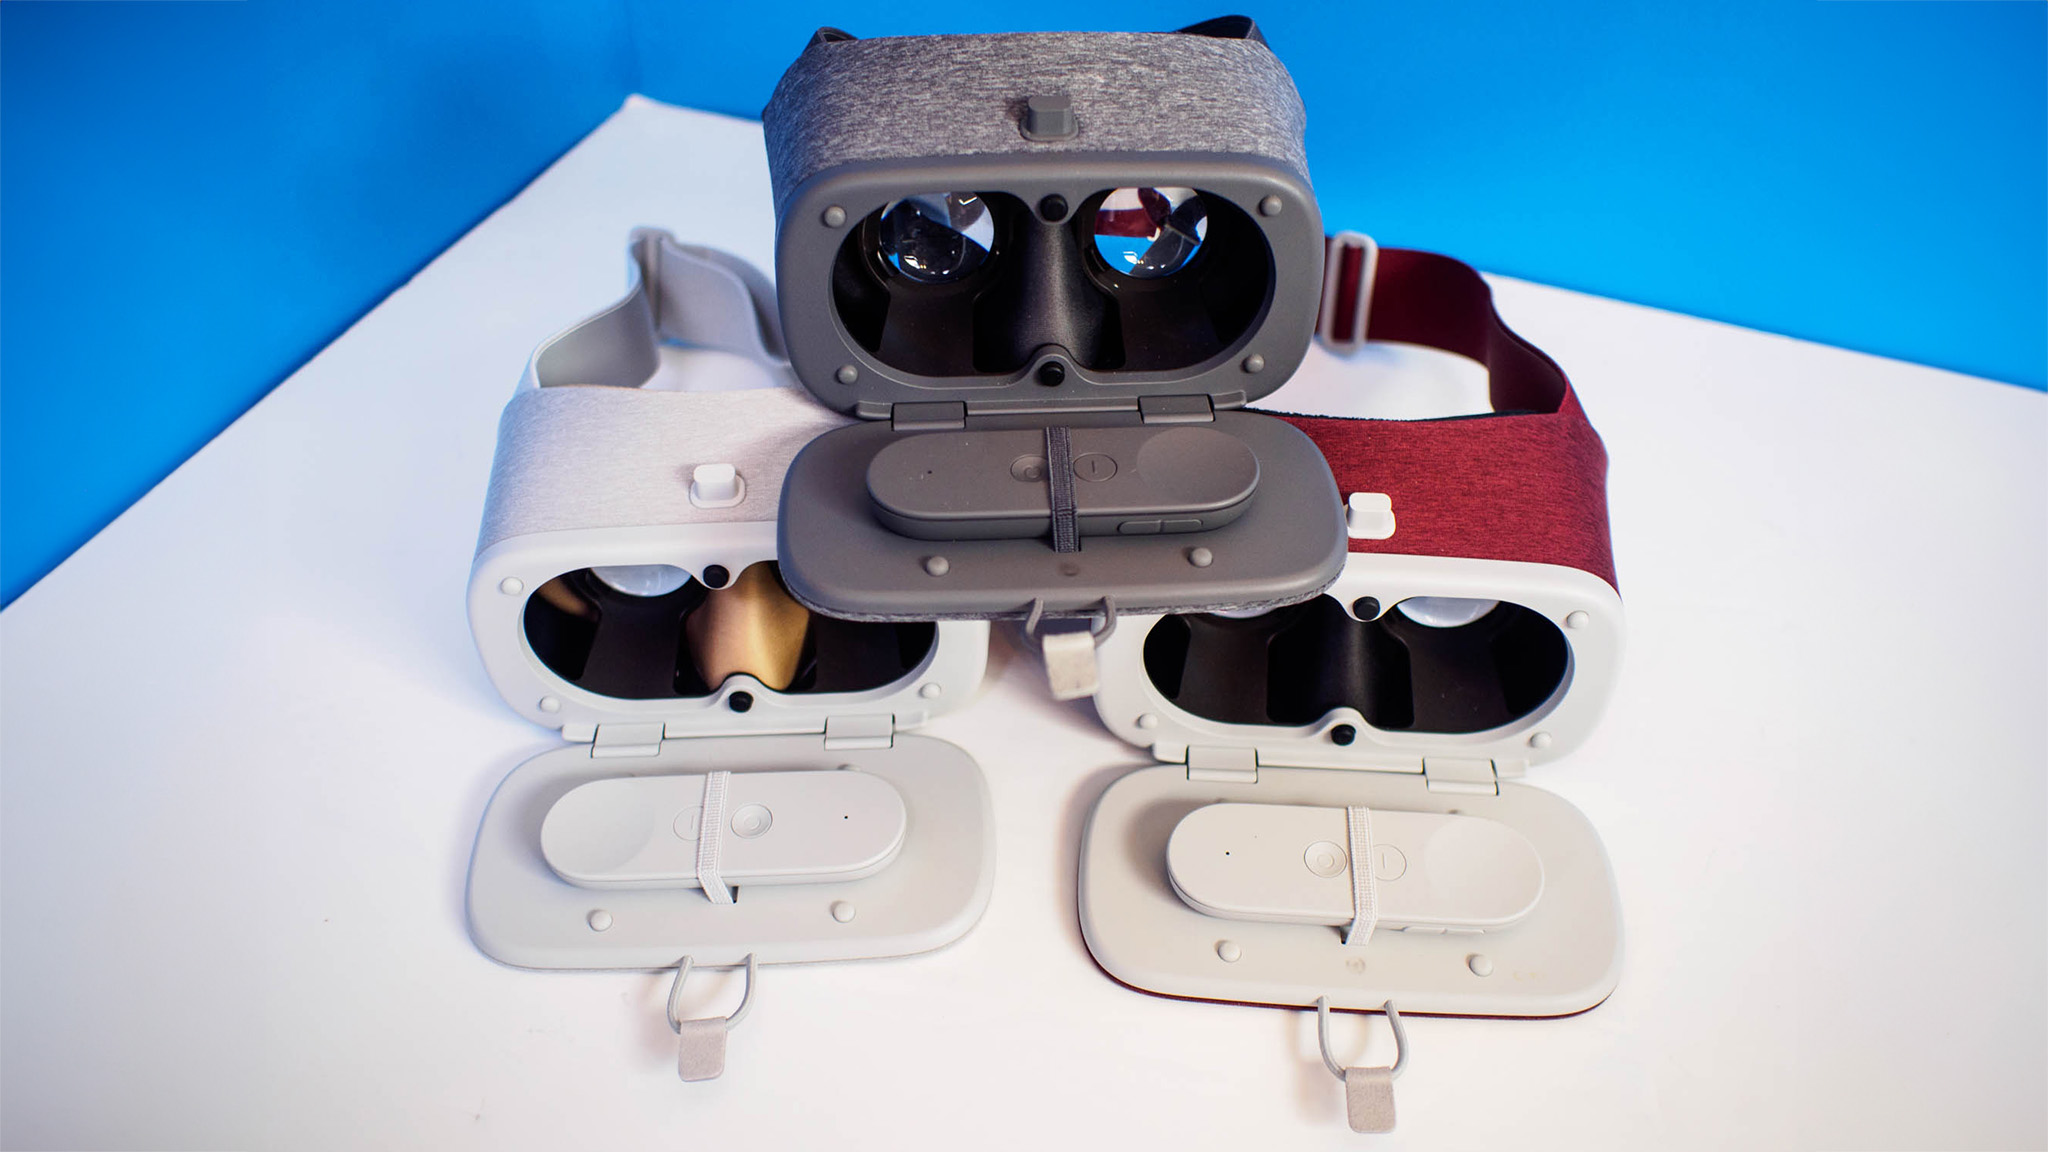 All the colors of the original Google Daydream View headset